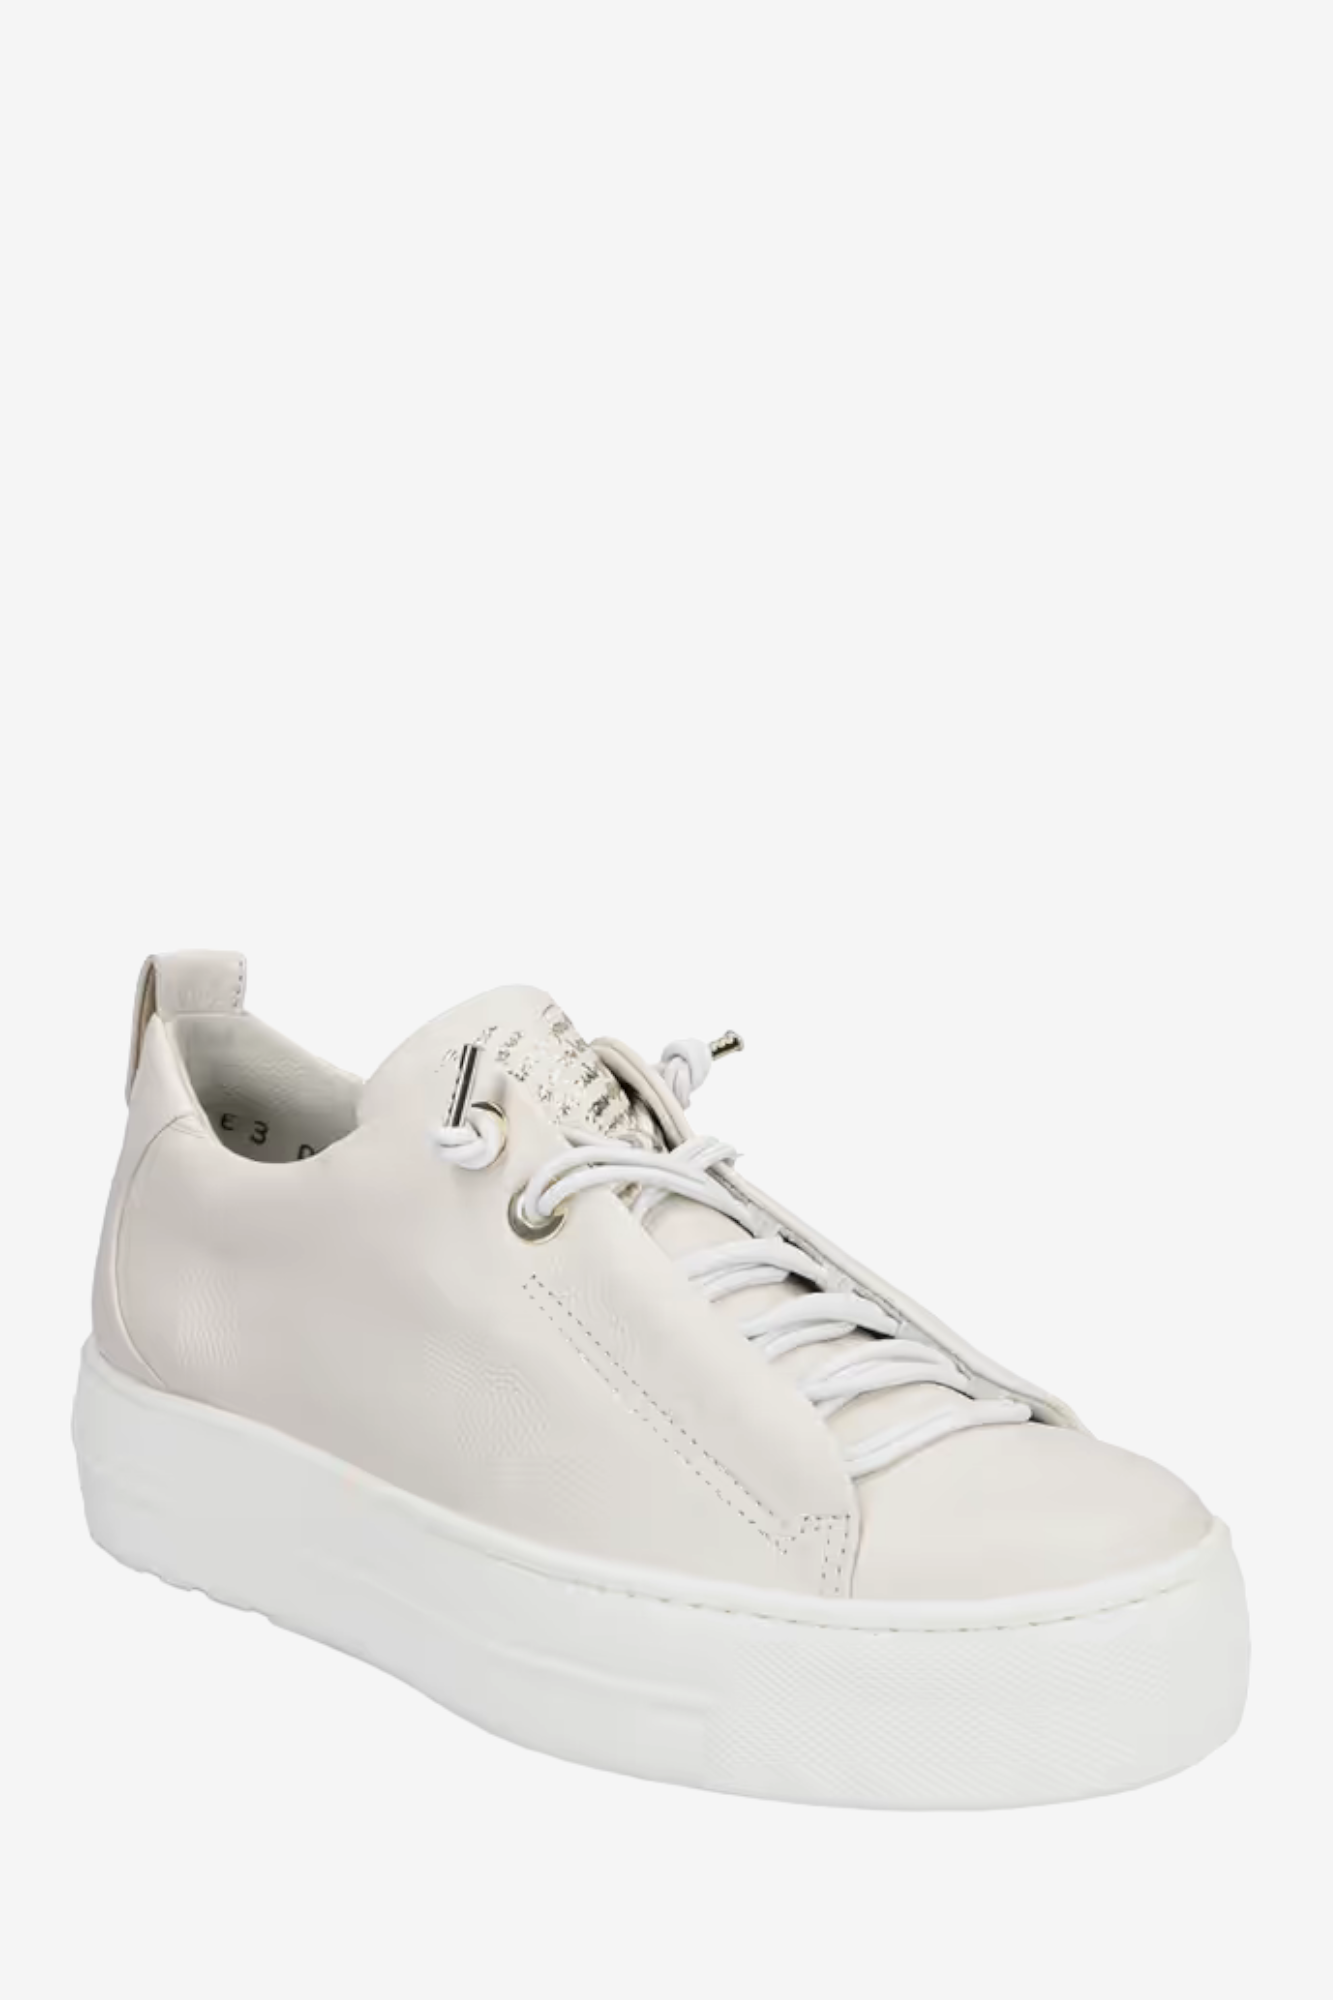 PAUL GREEN 5017 IVORY/GOLD LEATHER TRAINER